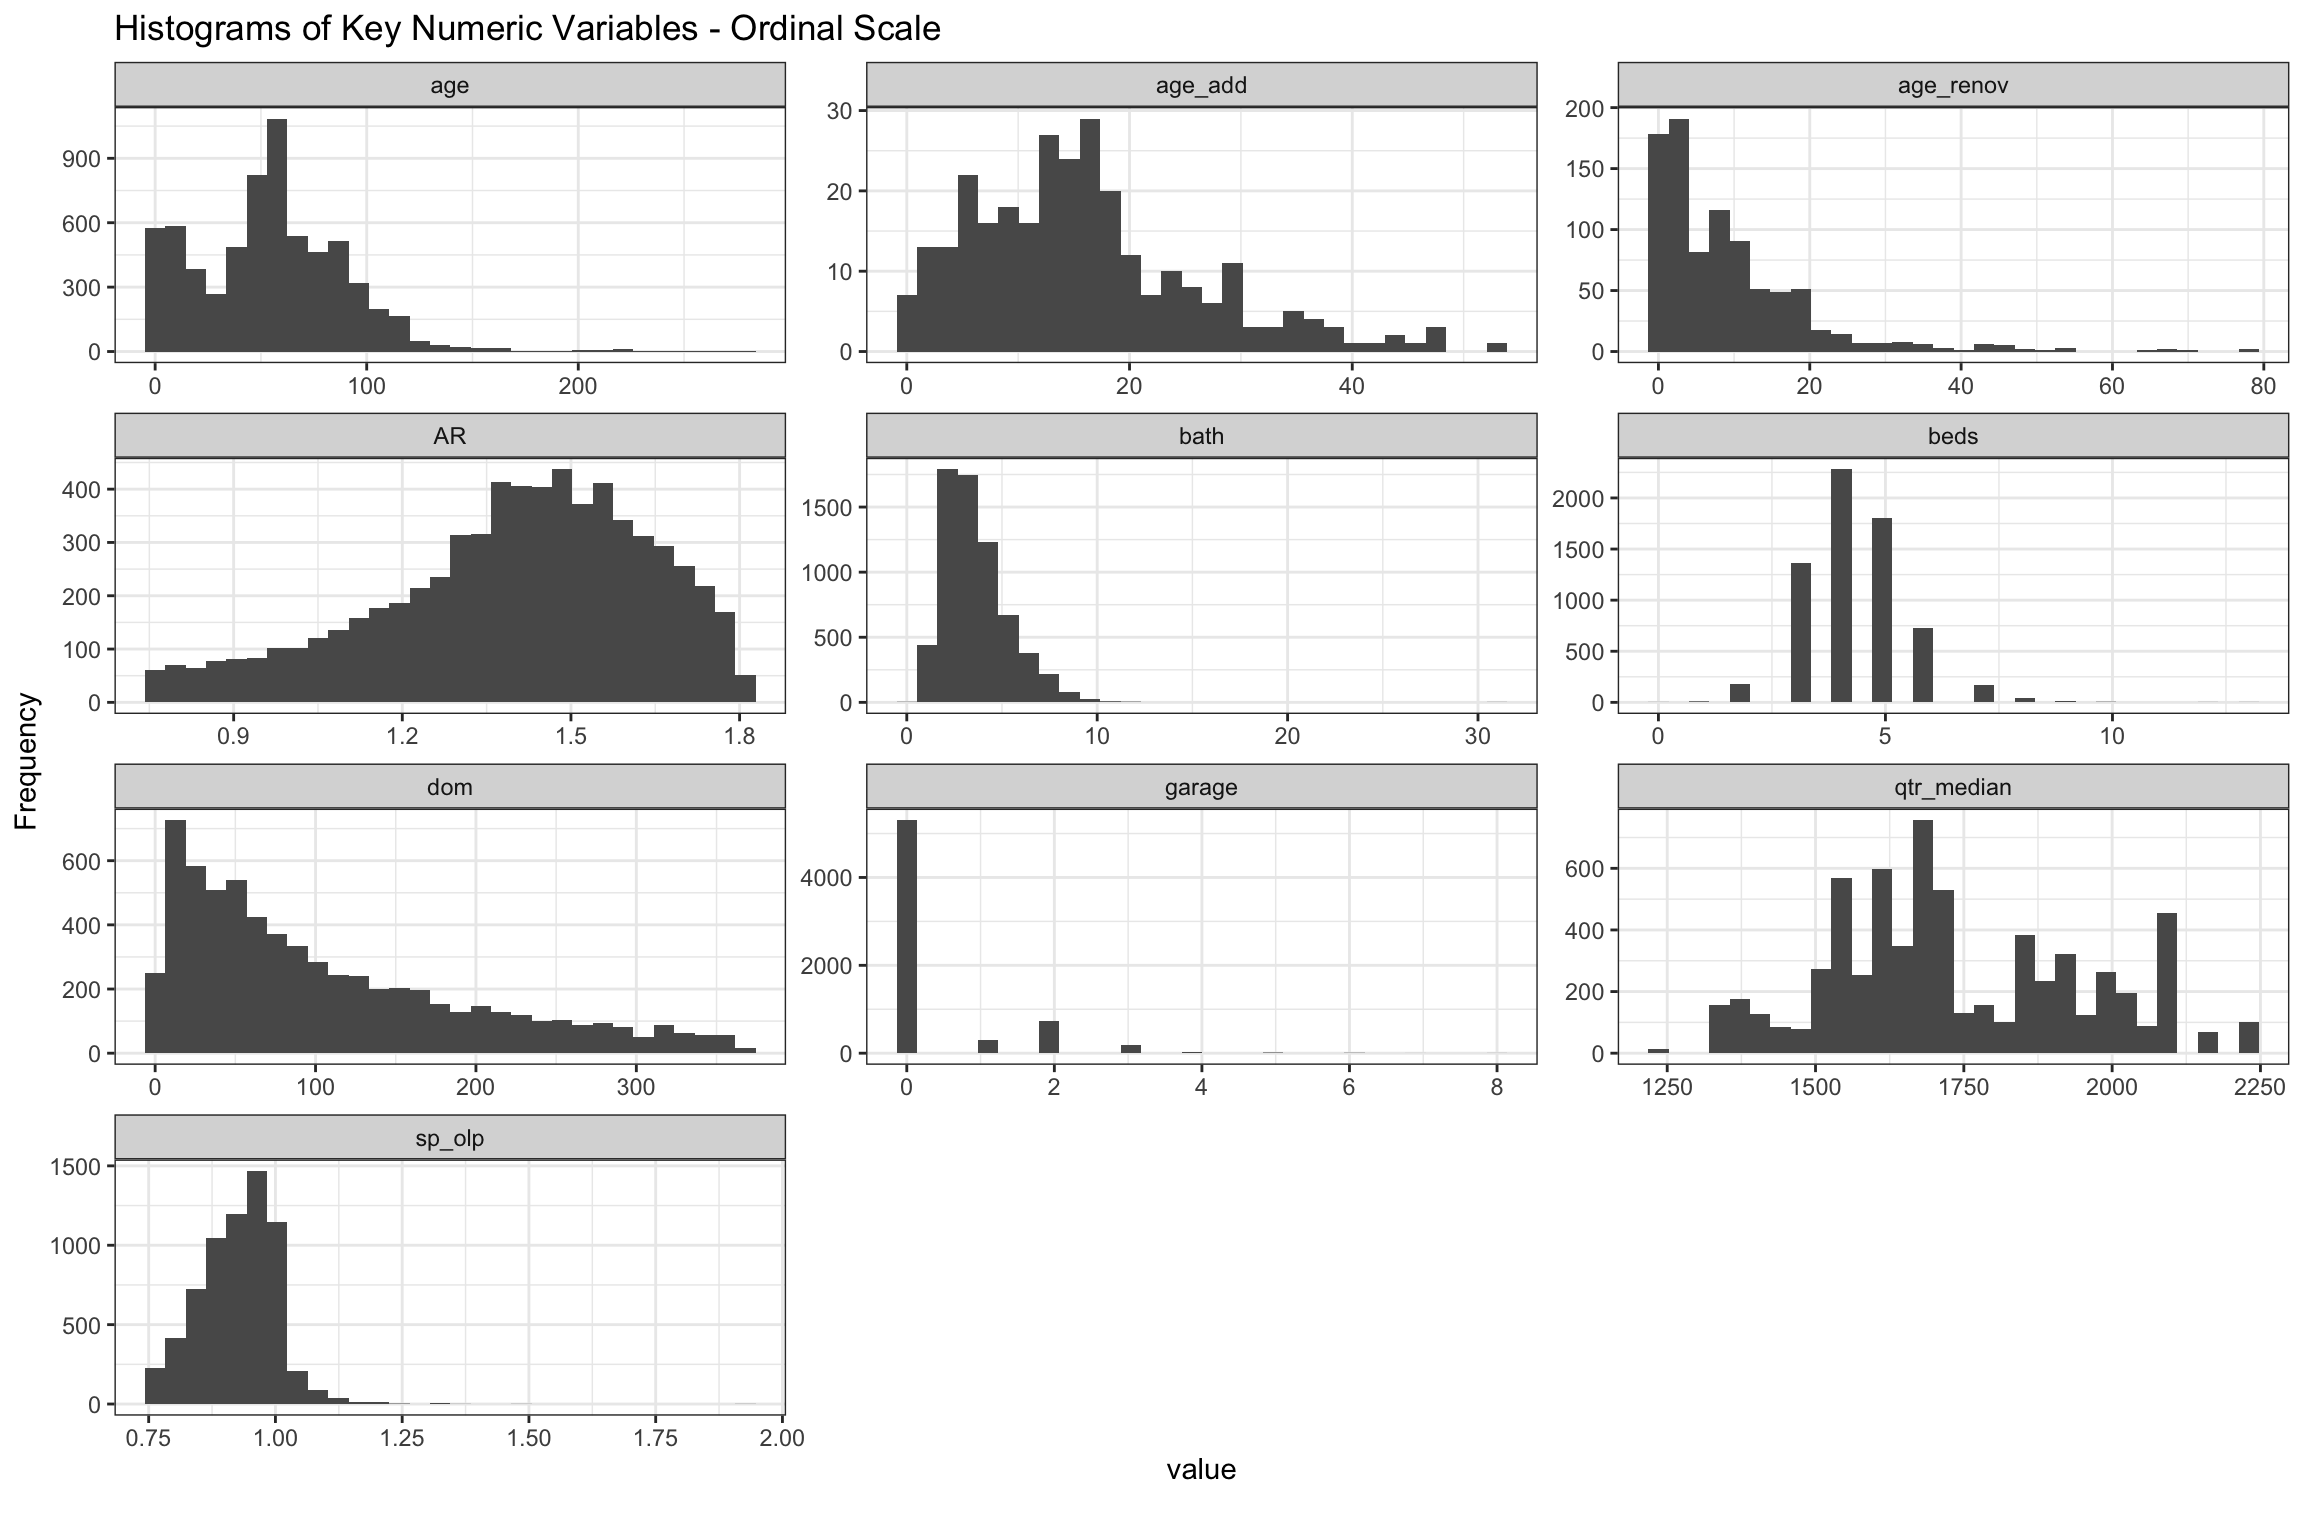 Histograms of Key Numeric Variables on Ordinal Scale from 2004-20